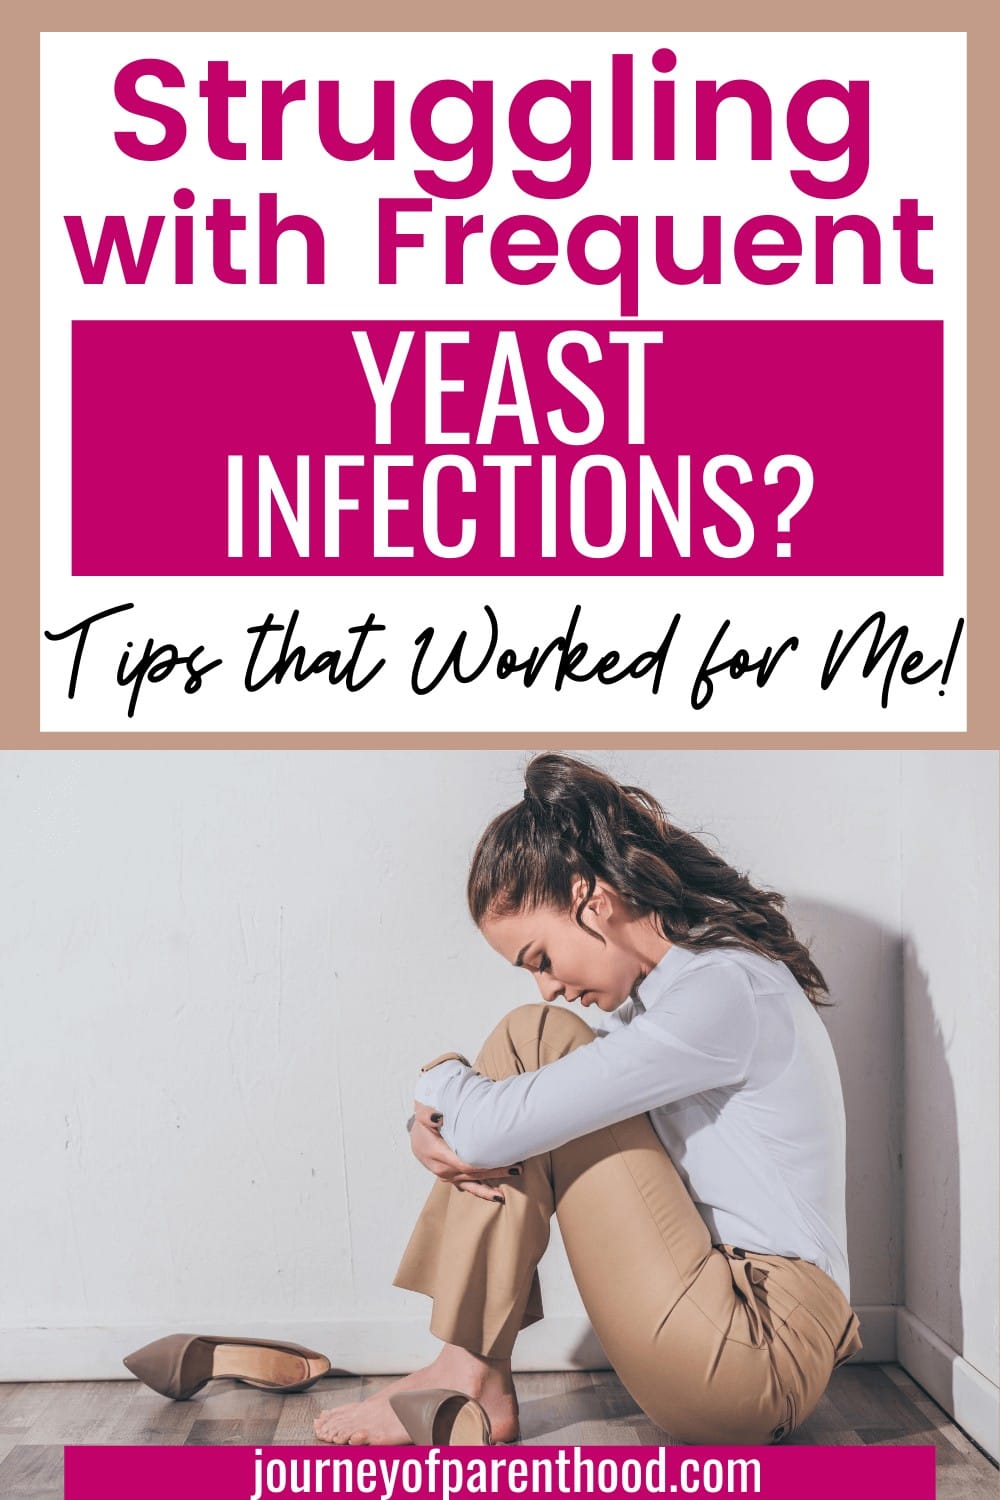 Ways to Prevent Yeast Infections